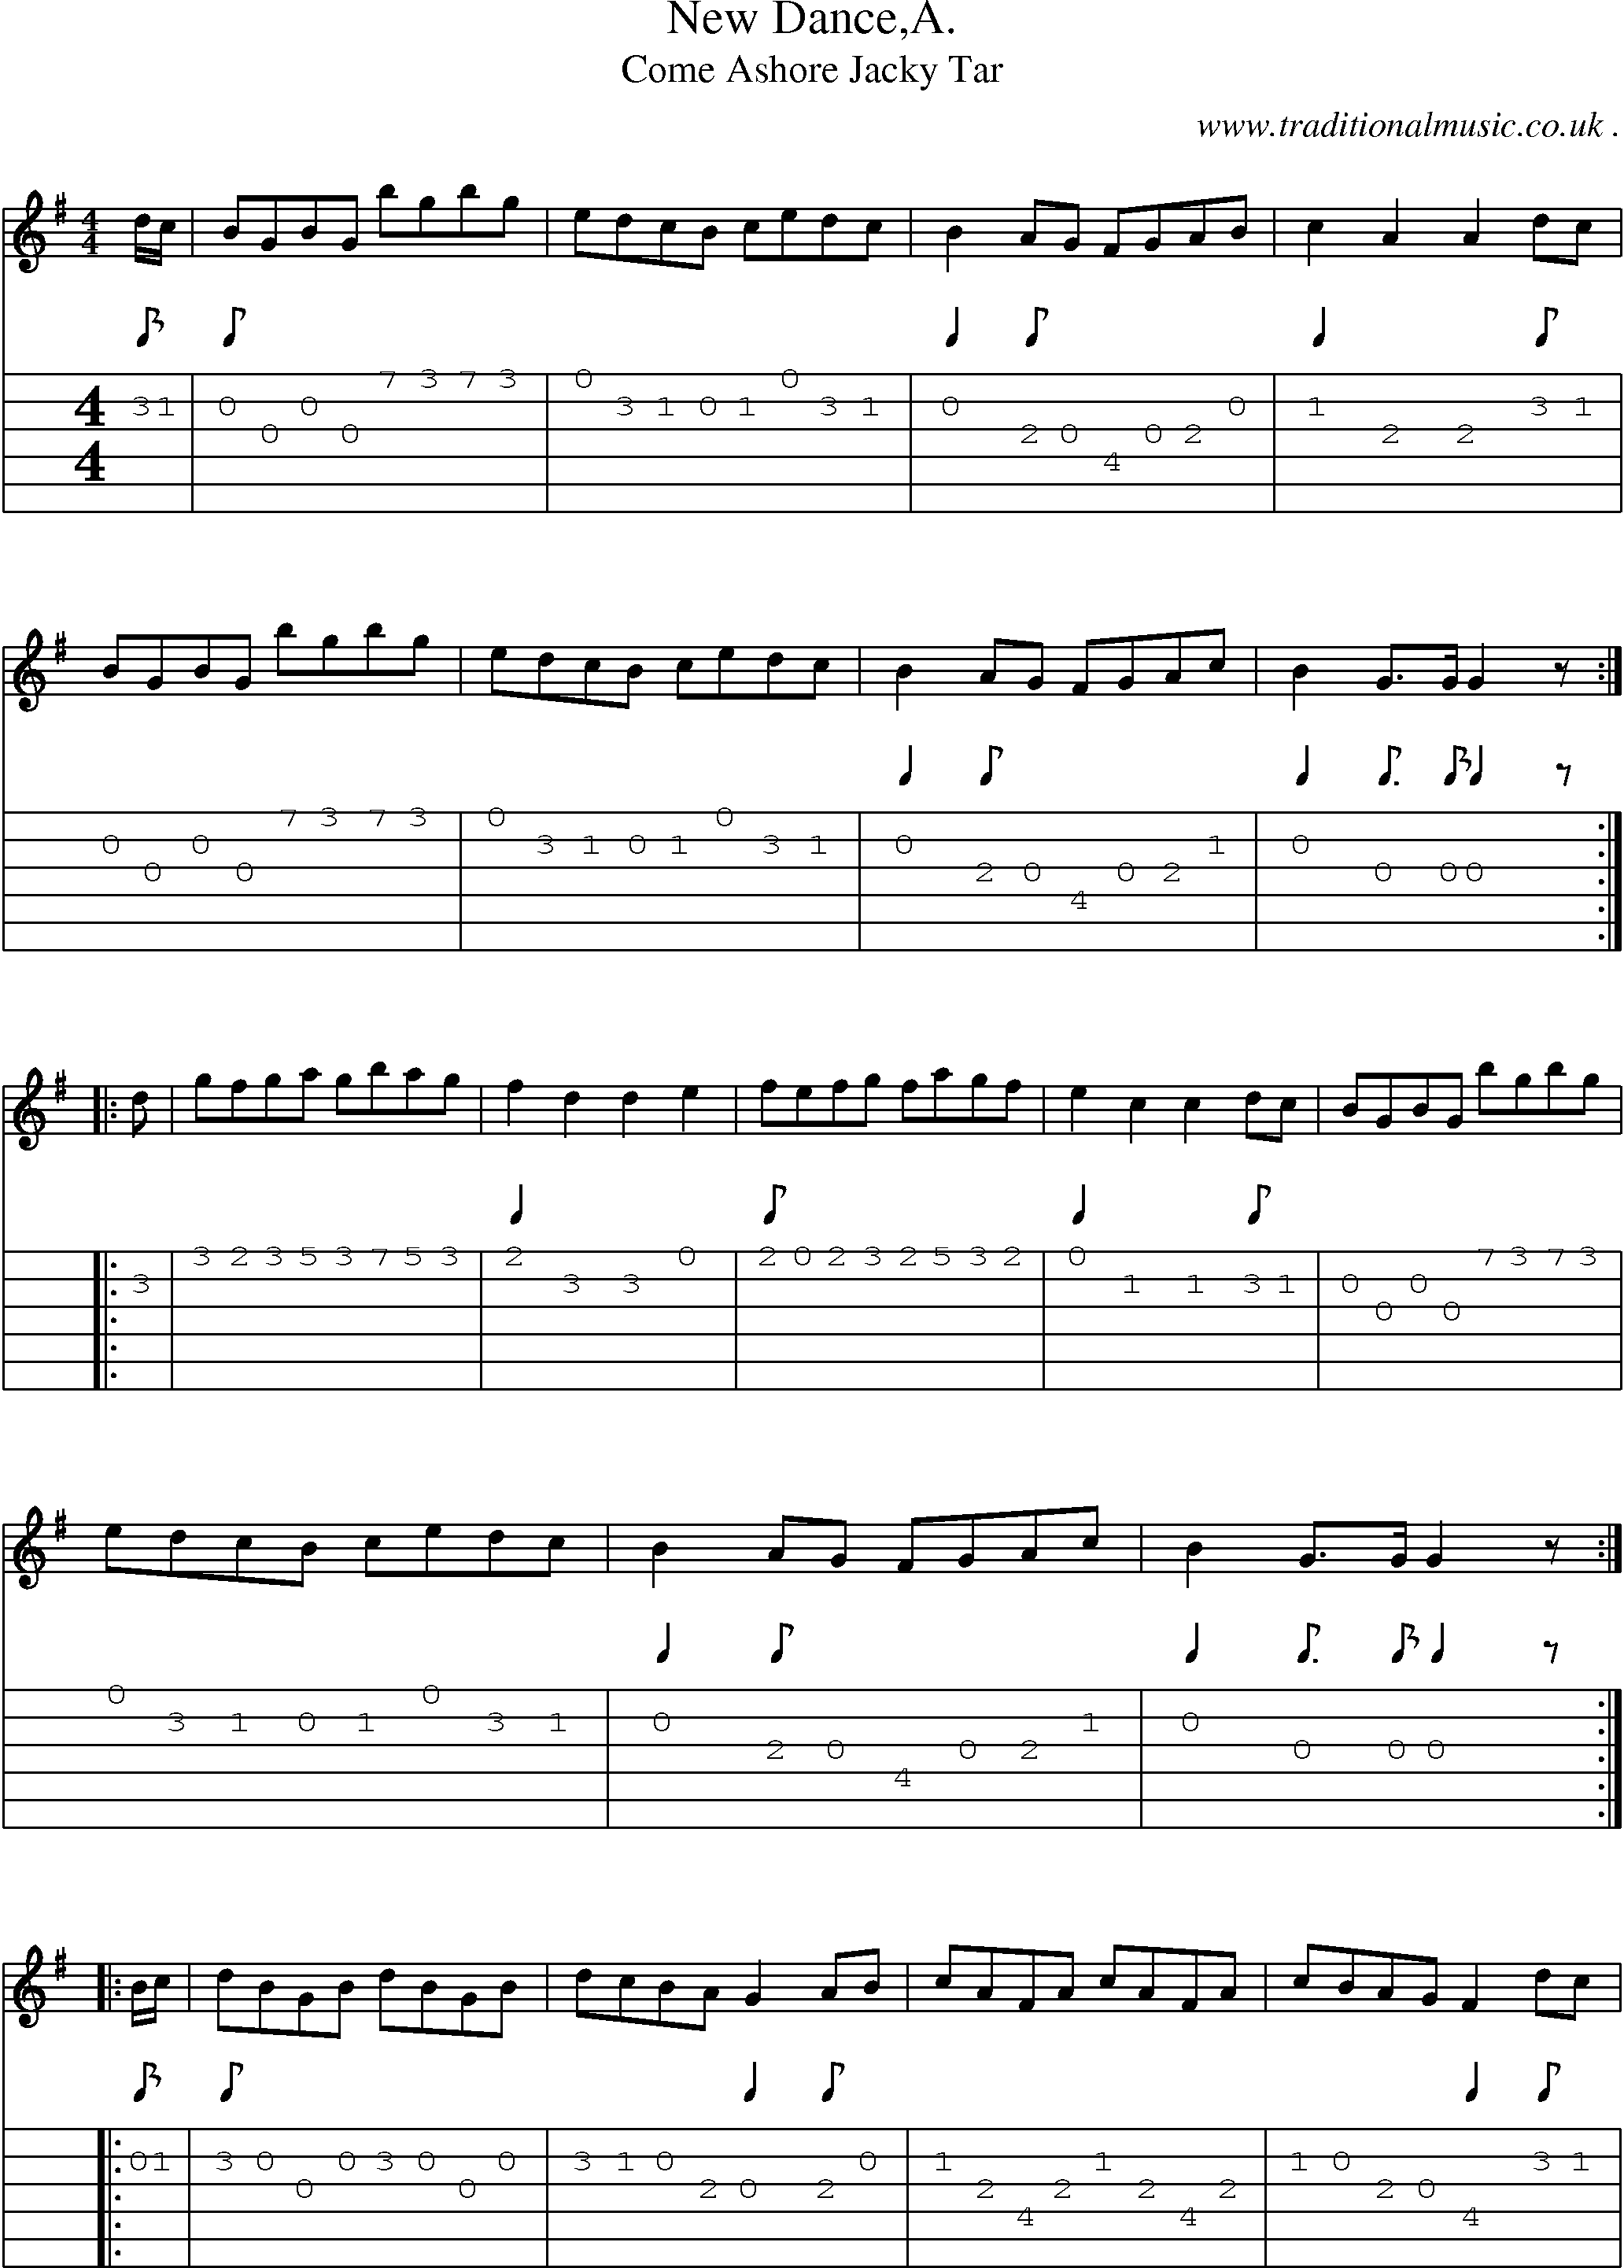 Sheet-Music and Guitar Tabs for New Dancea